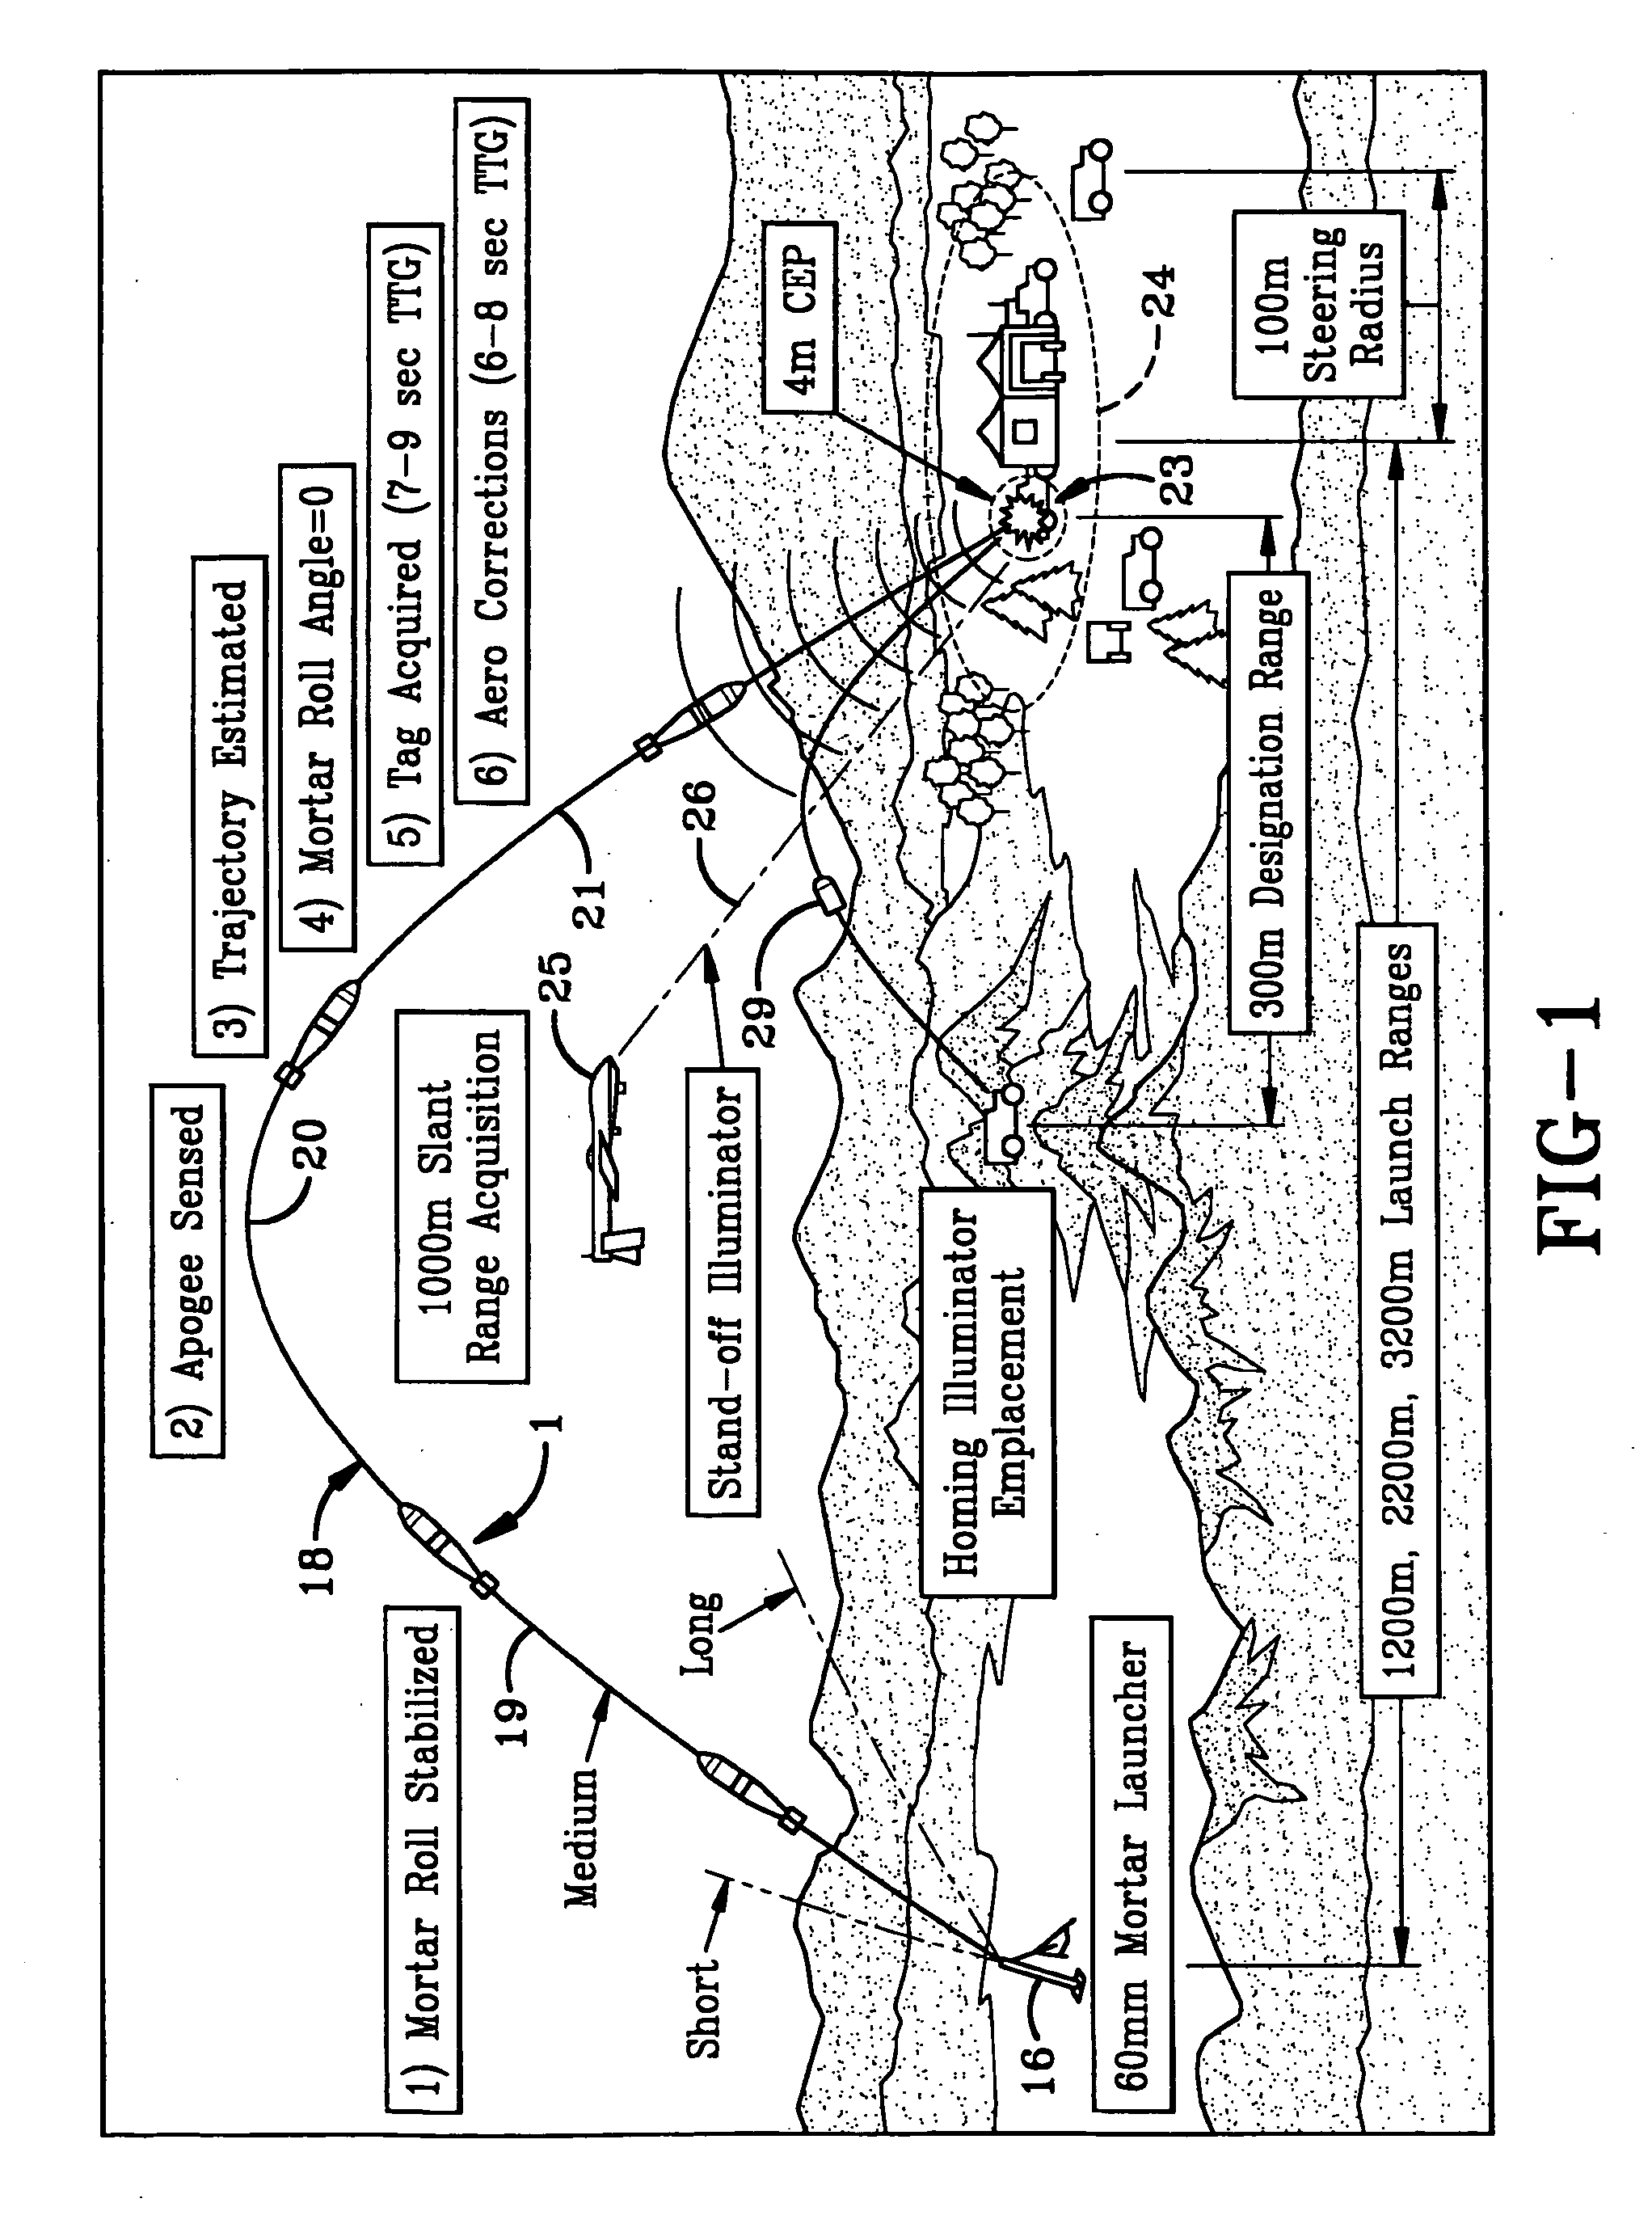 Optically Guided Munition Control System and Method